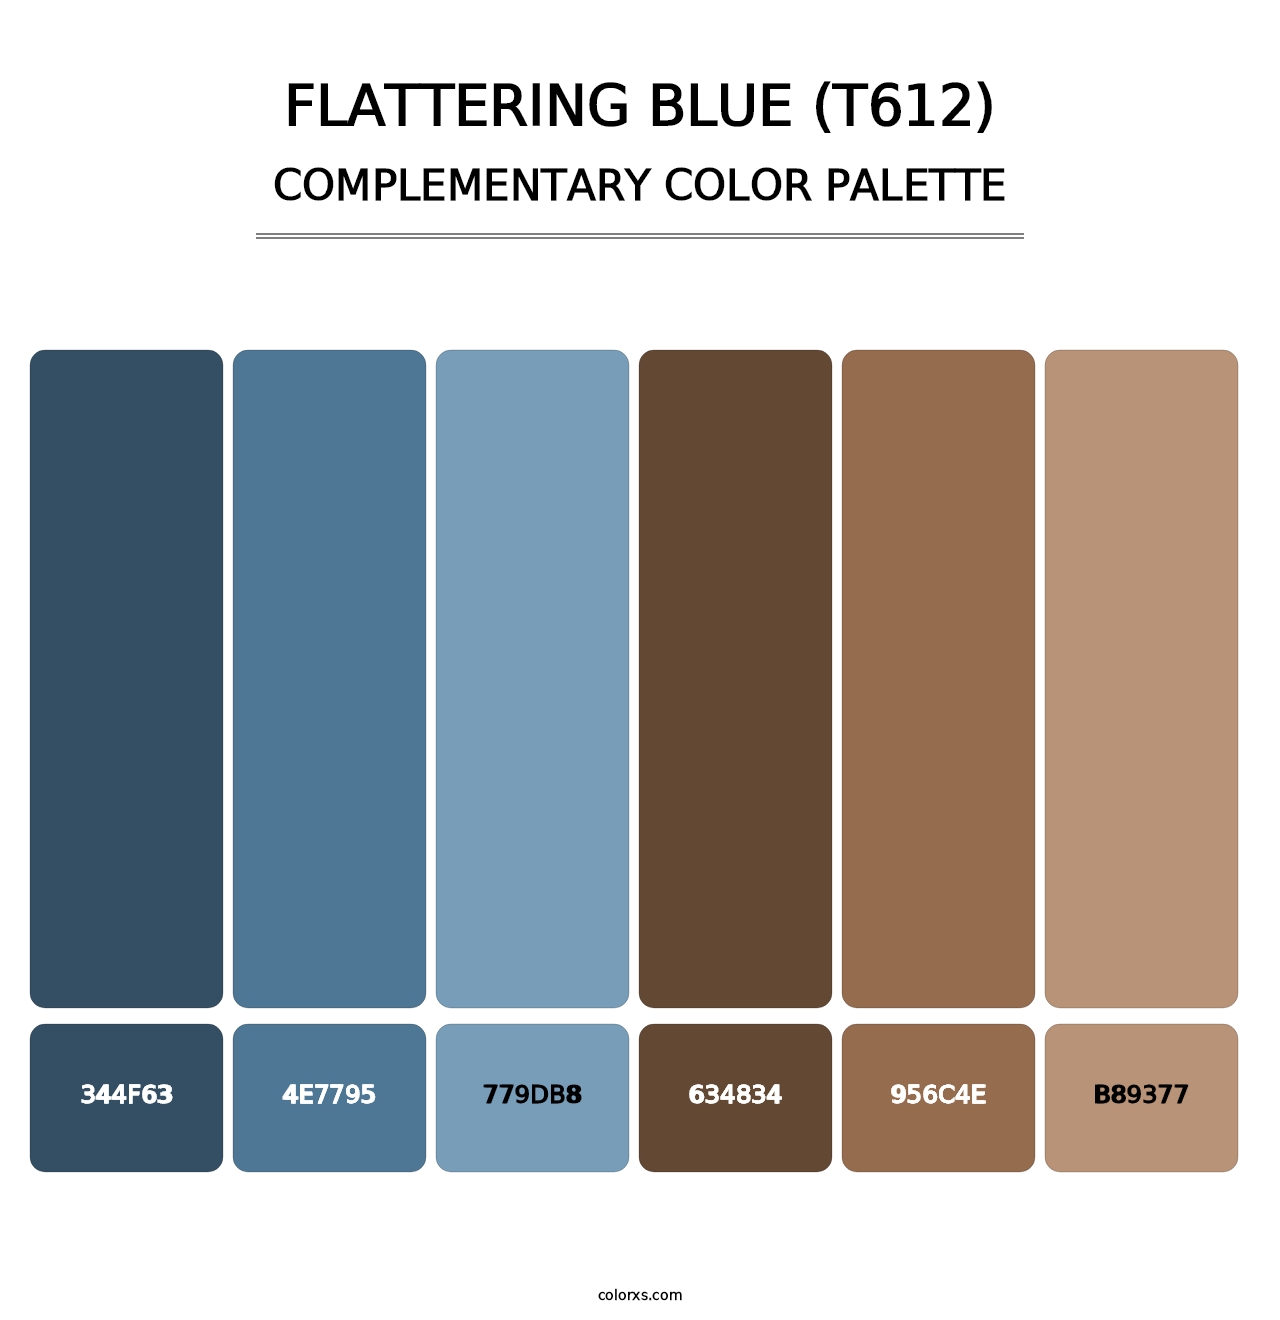 Flattering Blue (T612) - Complementary Color Palette